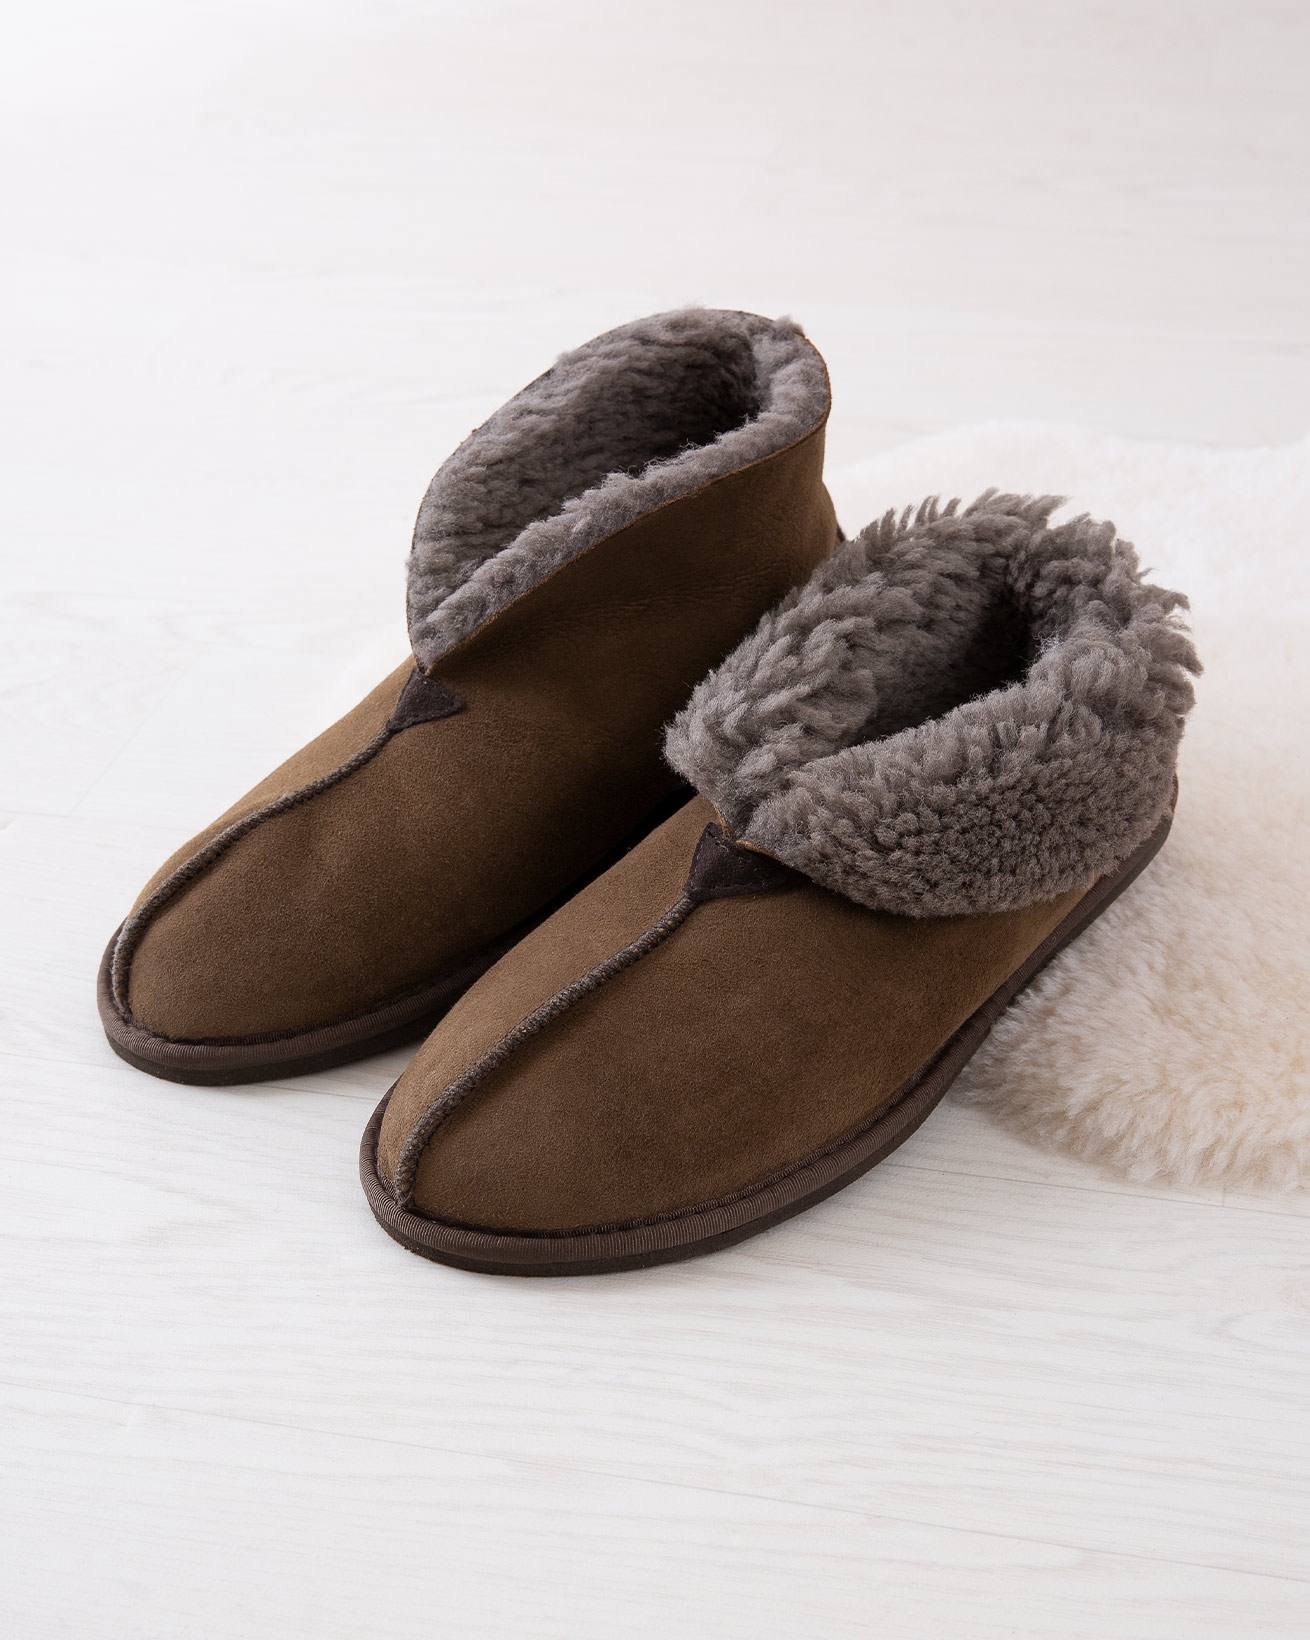 Men's Bootee Slipper / Mocca / 9